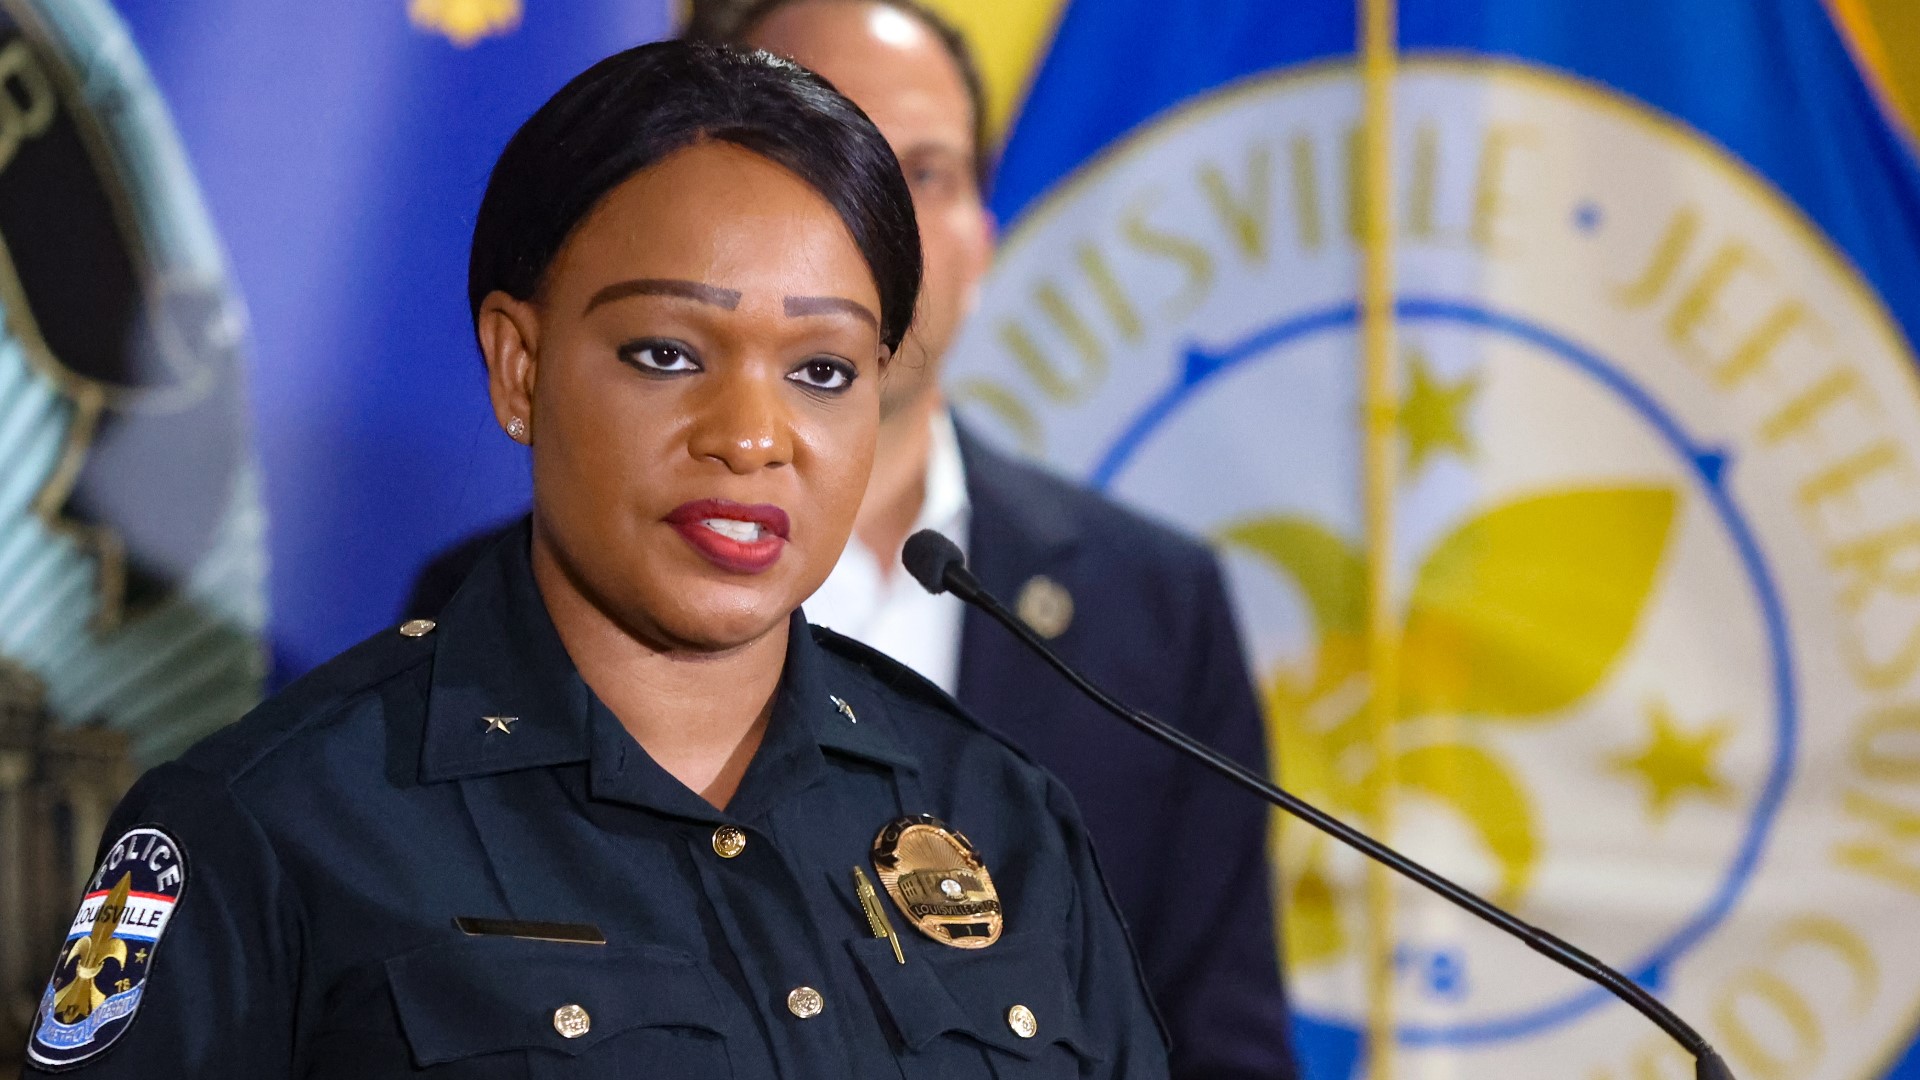 Alongside Mayor Craig Greenberg, Chief Jackie Gwinn-Villaroel didn't mince words at the Louisville Forum, saying LMPD is going after gang members every day.